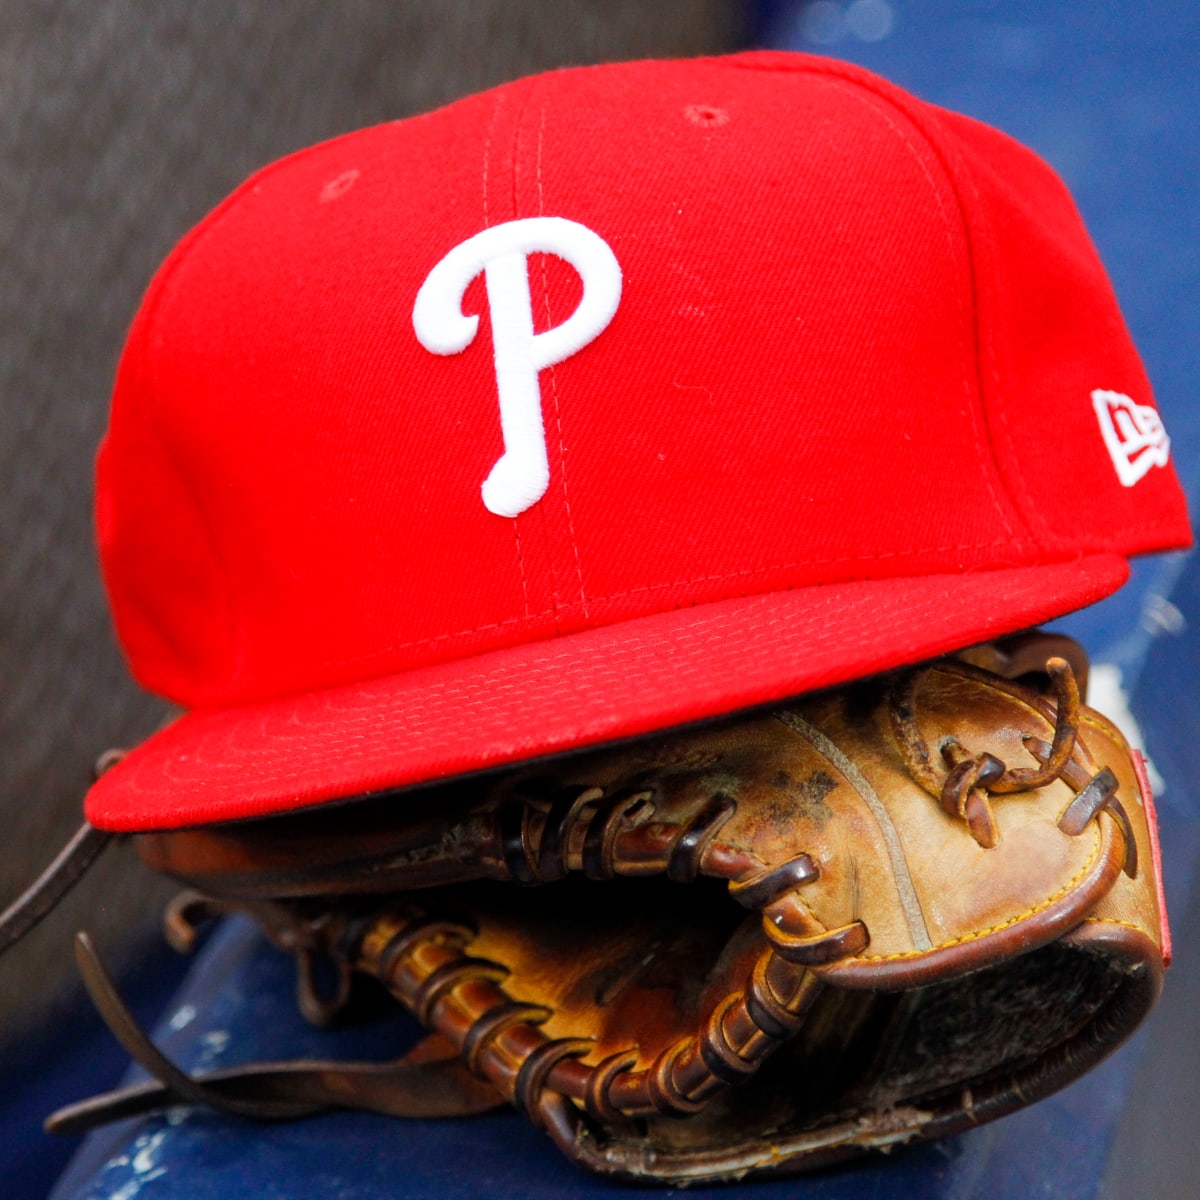 AFL Reports: Logan O'Hoppe is Philly's Most Underrated Prospect